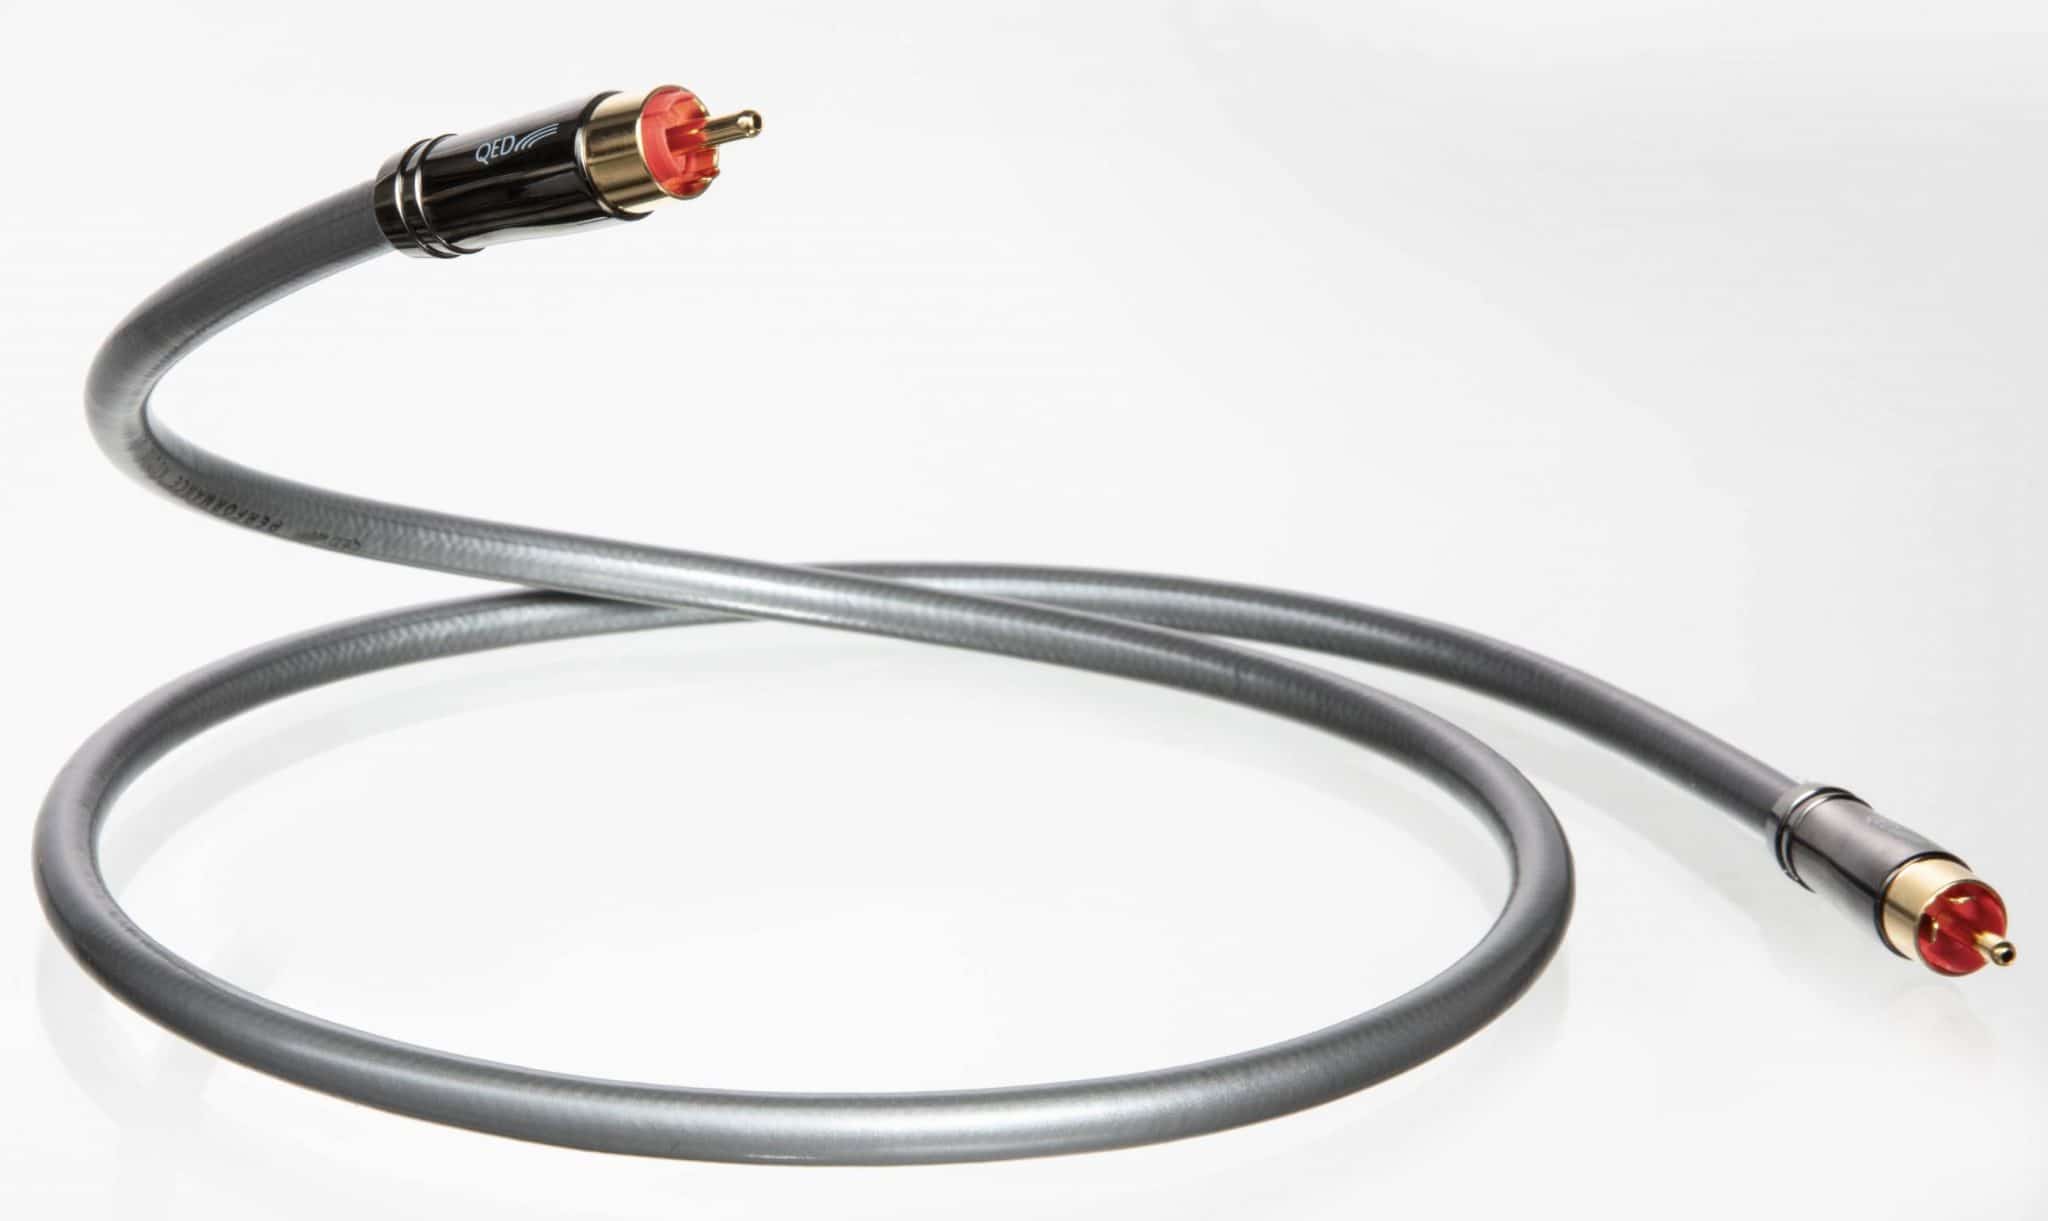 Performance Audio 40i Interconnects From QED